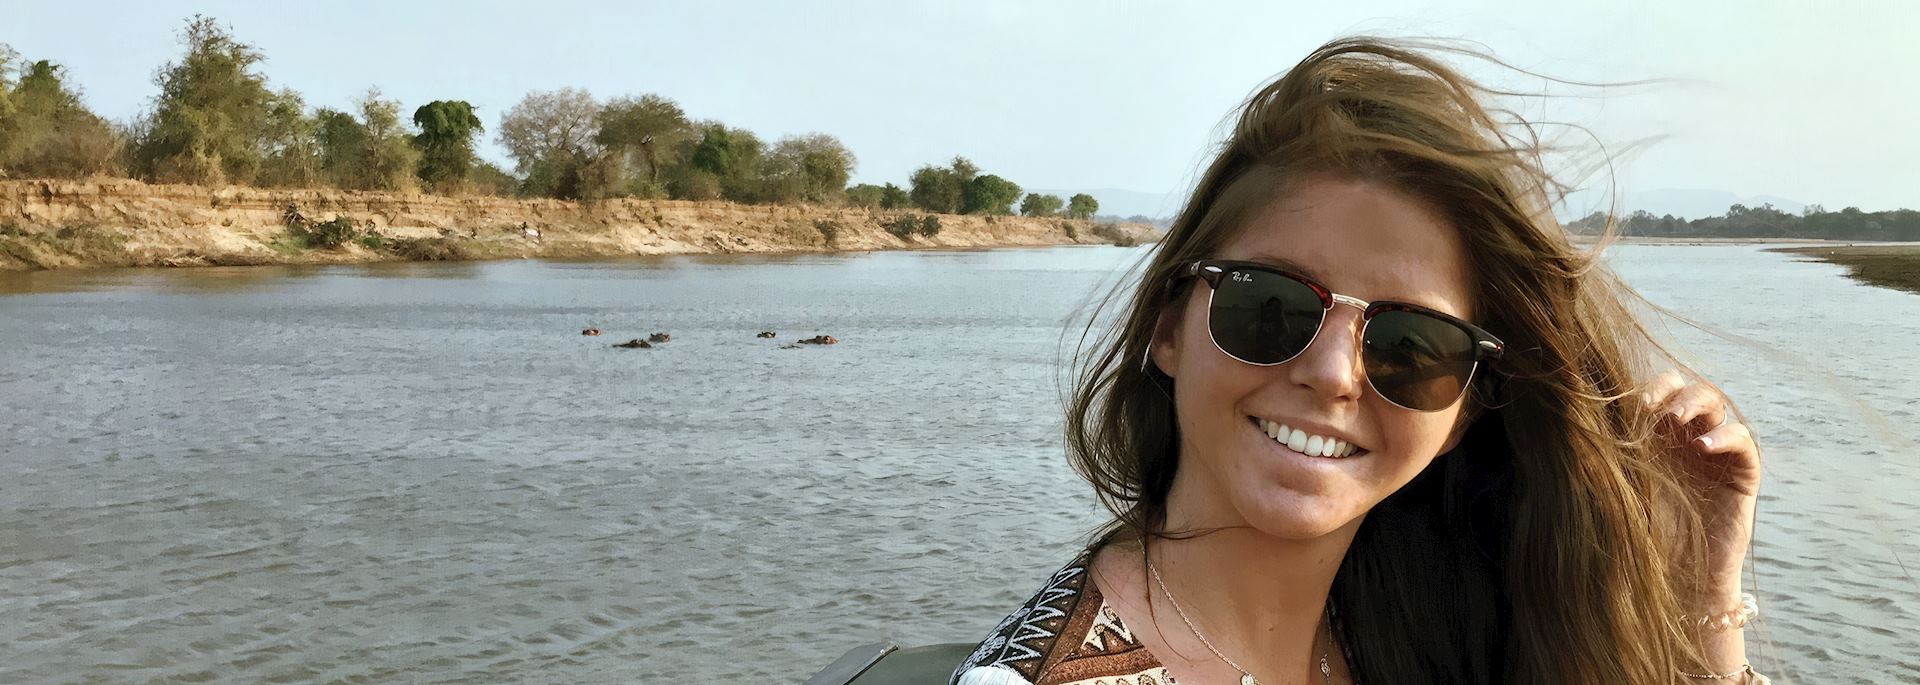 Louise on the Luangwa River, Zambia